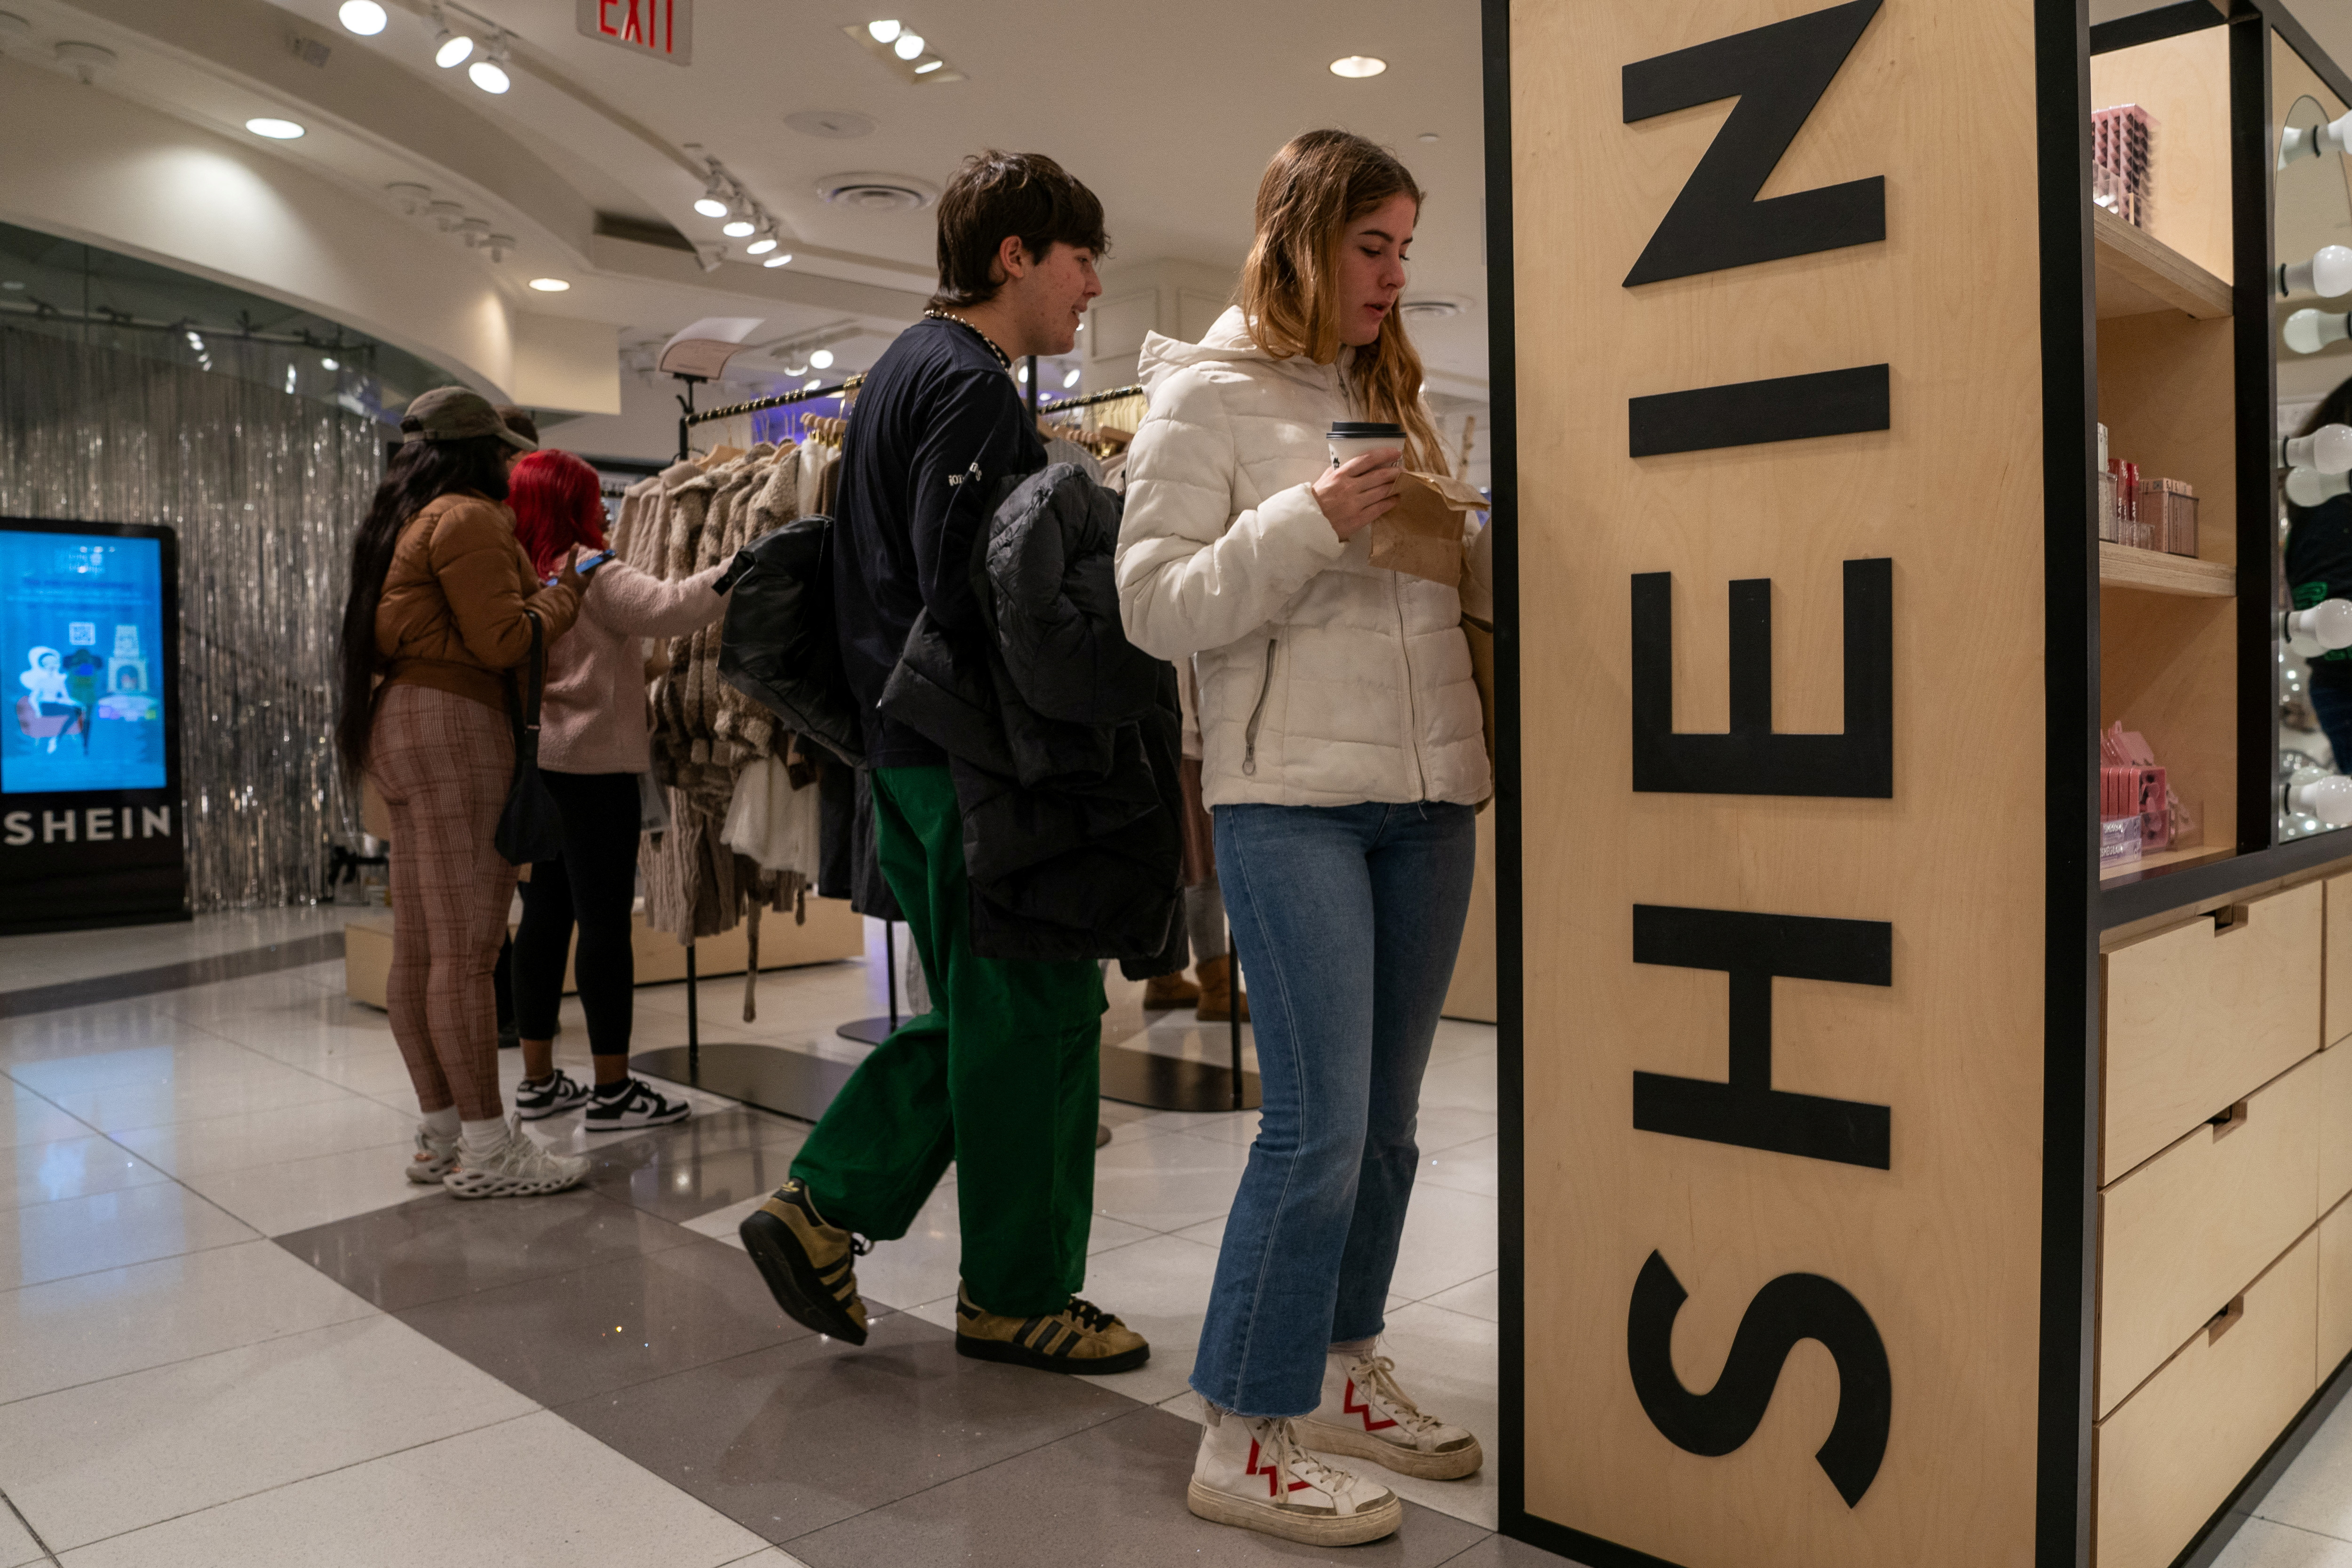 Shein Holiday Pop-Up Shop In Forever 21 at Times Square